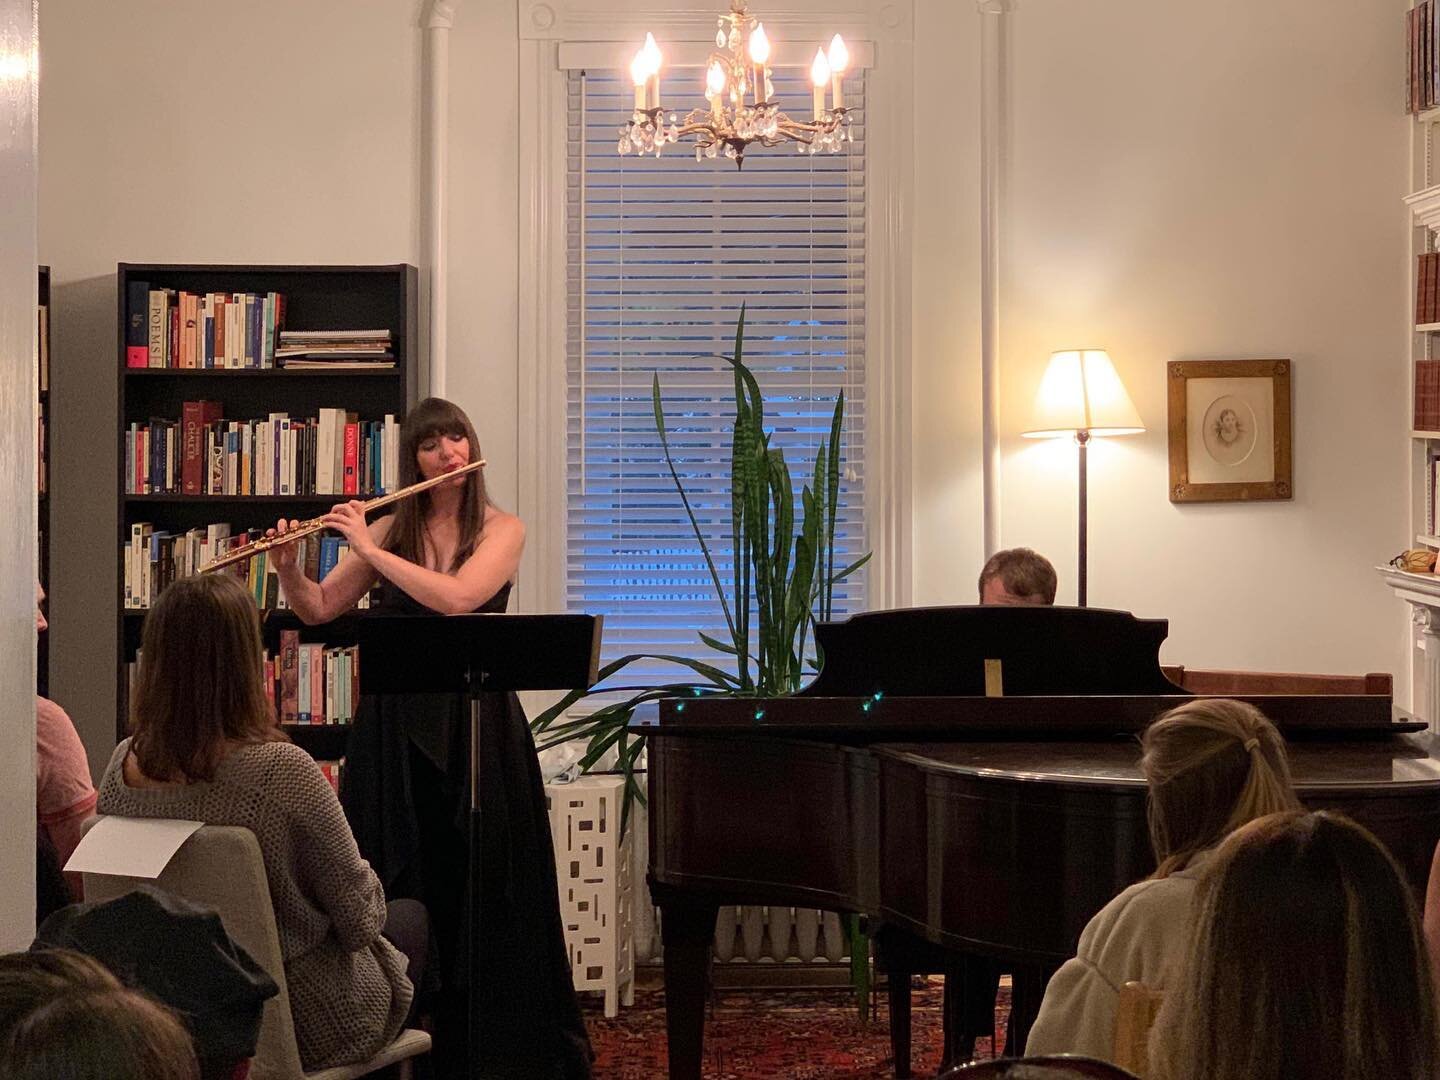 A special favorite of the #sonosthrowback posts is SONOSYNTHESIS: Schubertiade. 9.29.19. This fulfilled a 15 year old dream of performing in my own Schubertiade (a house concert of music all or mostly by Schubert). My favorite flute piece of all time